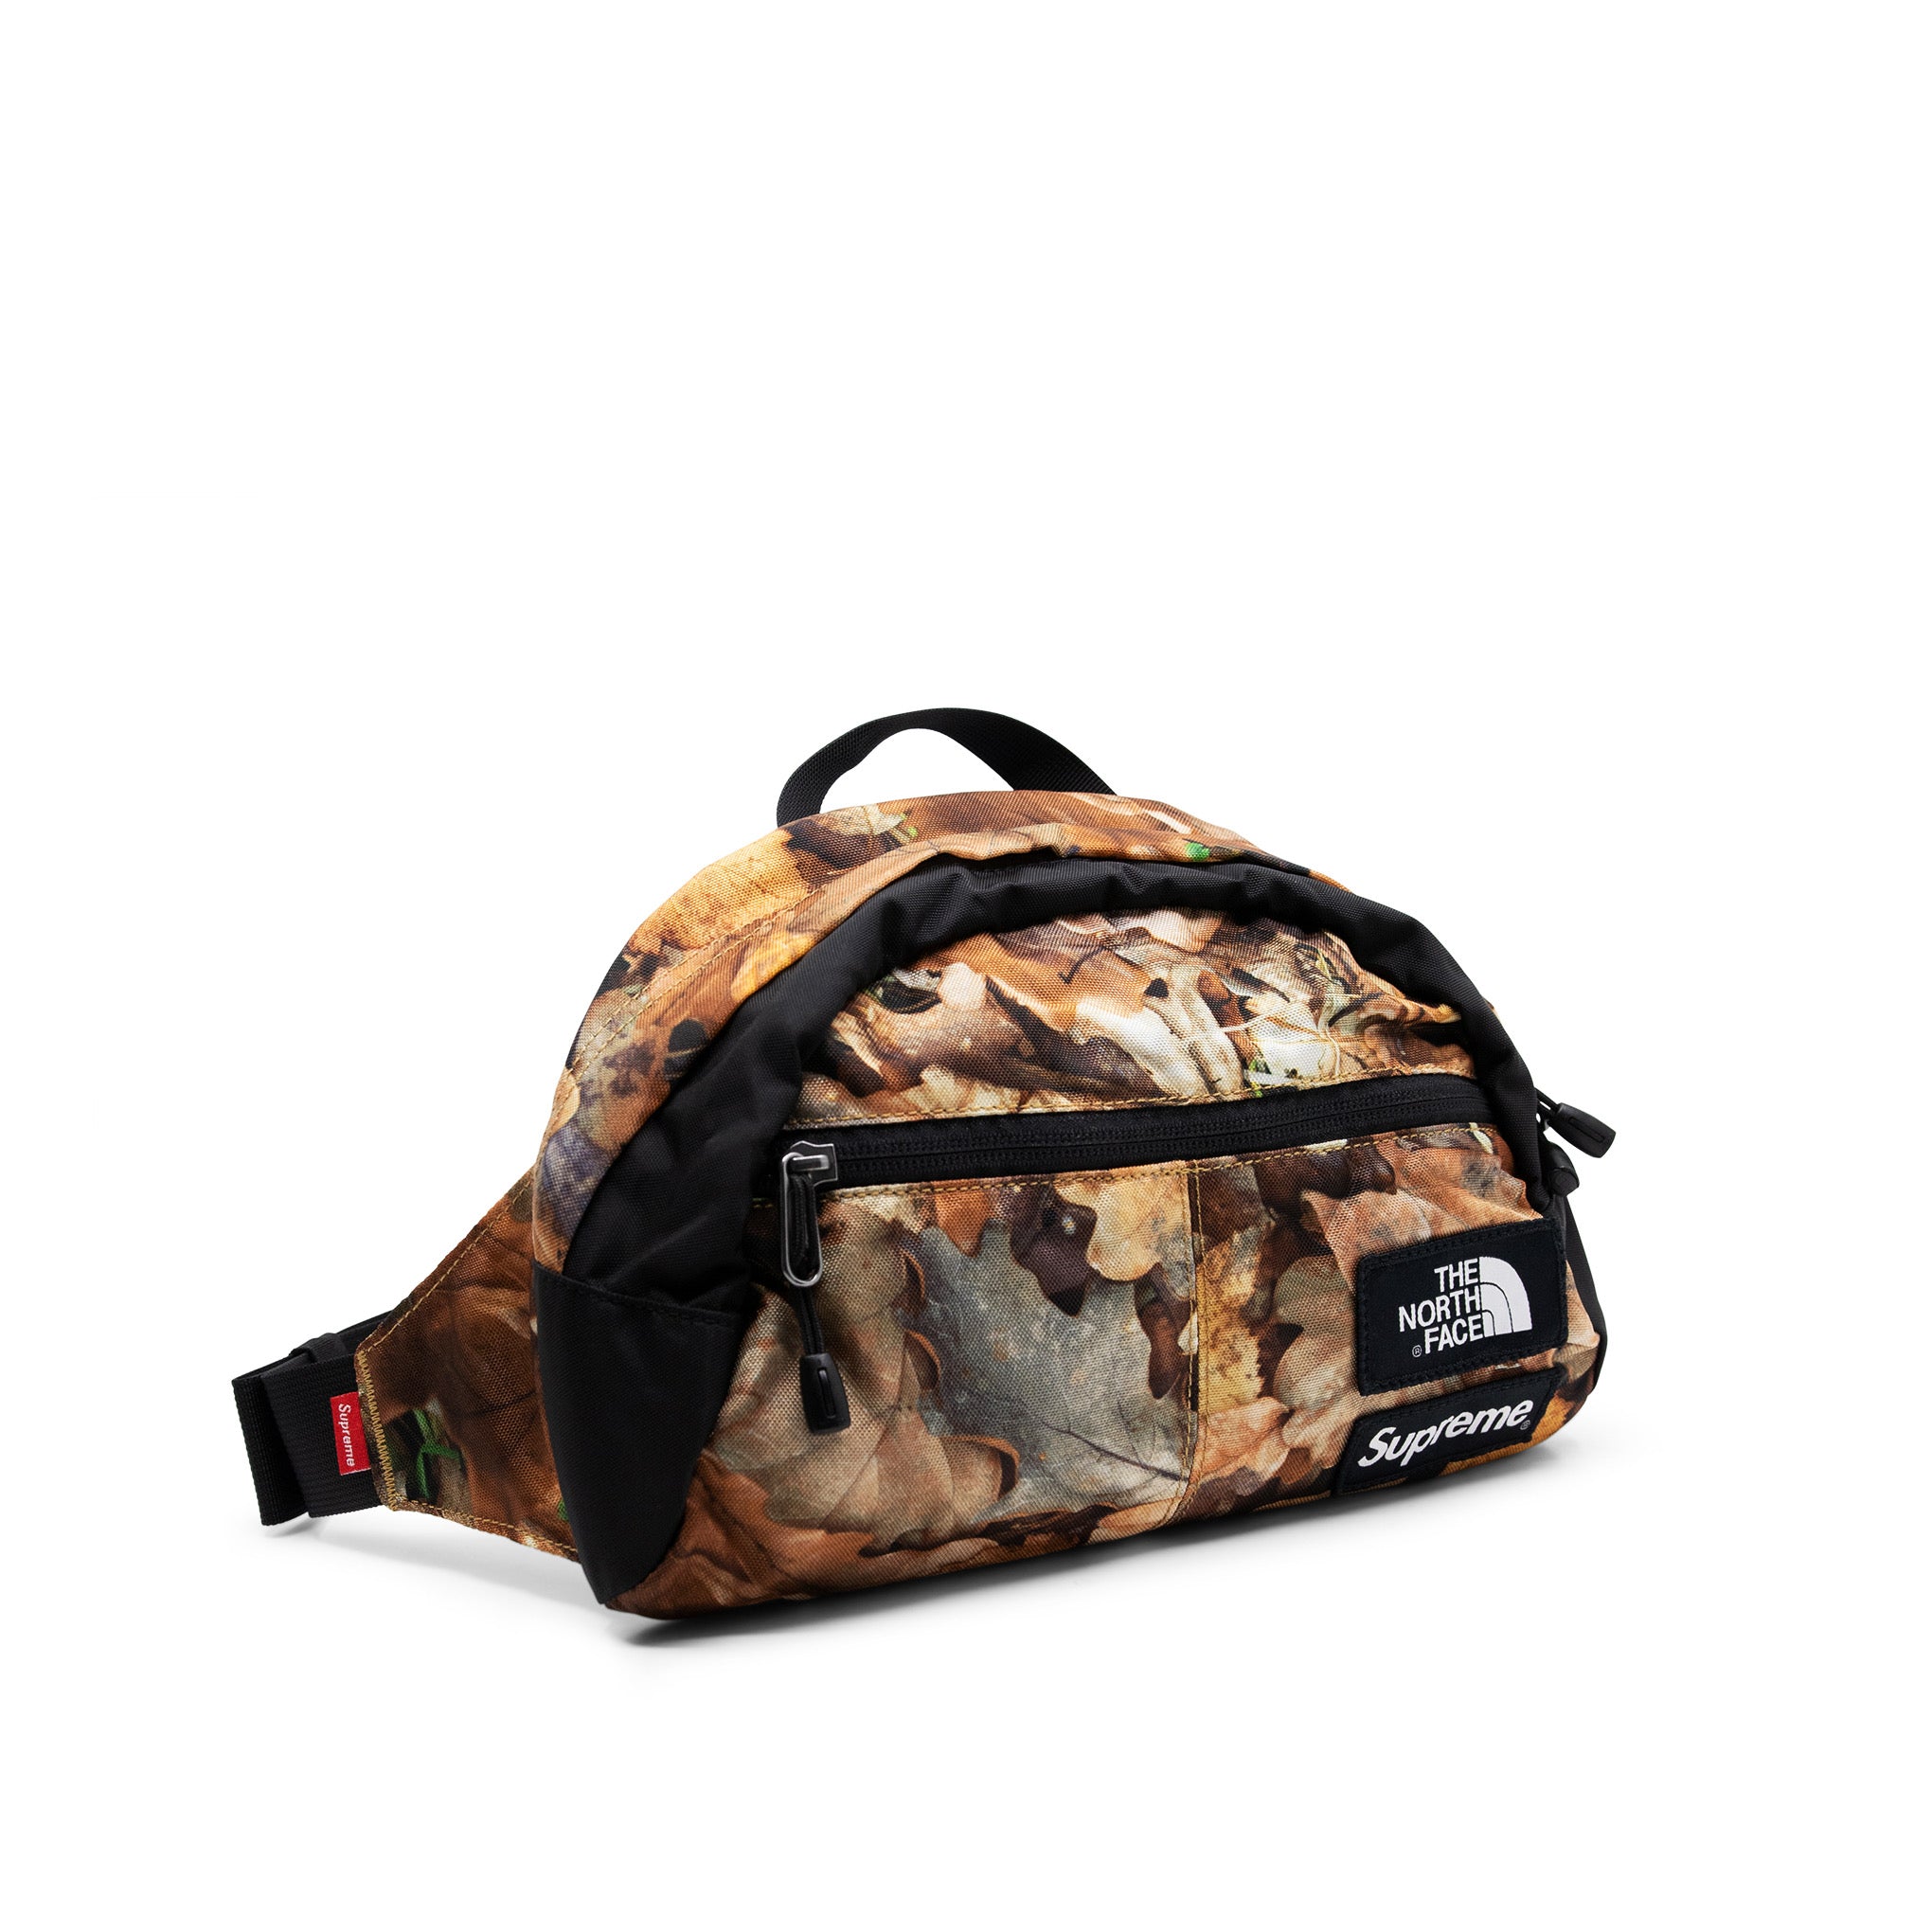 PAQUETE LUMBAR SUPREMO THE NORTH FACE ROO II (OI16)